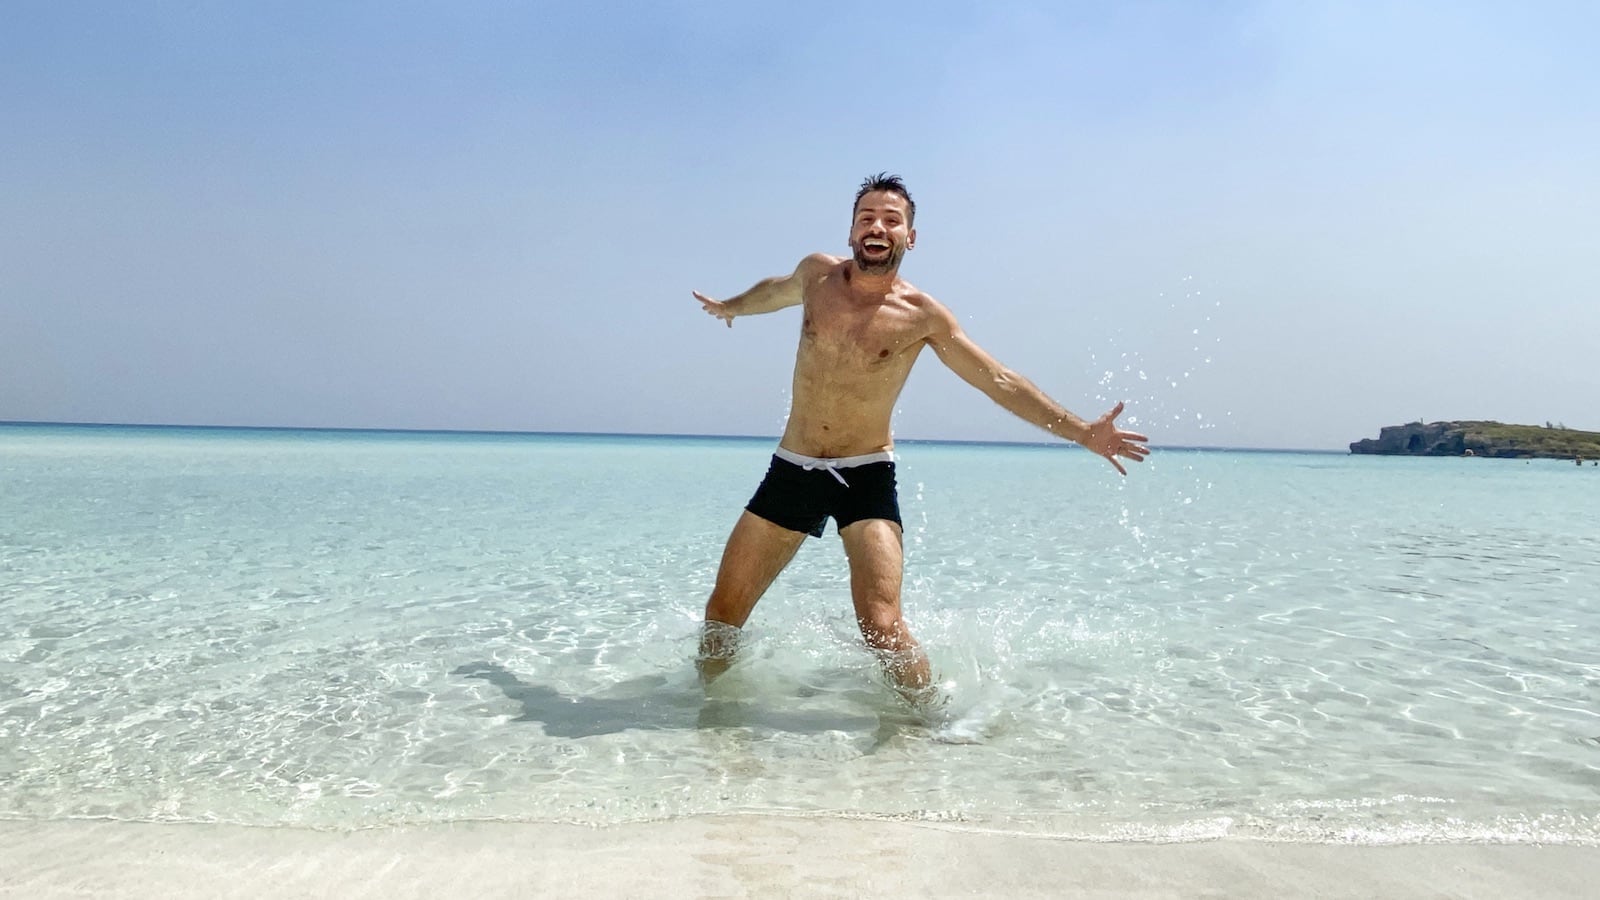 Sebastien Chaneac from Nomadic Boys bursting with happiness at the beach in Cyprus. 